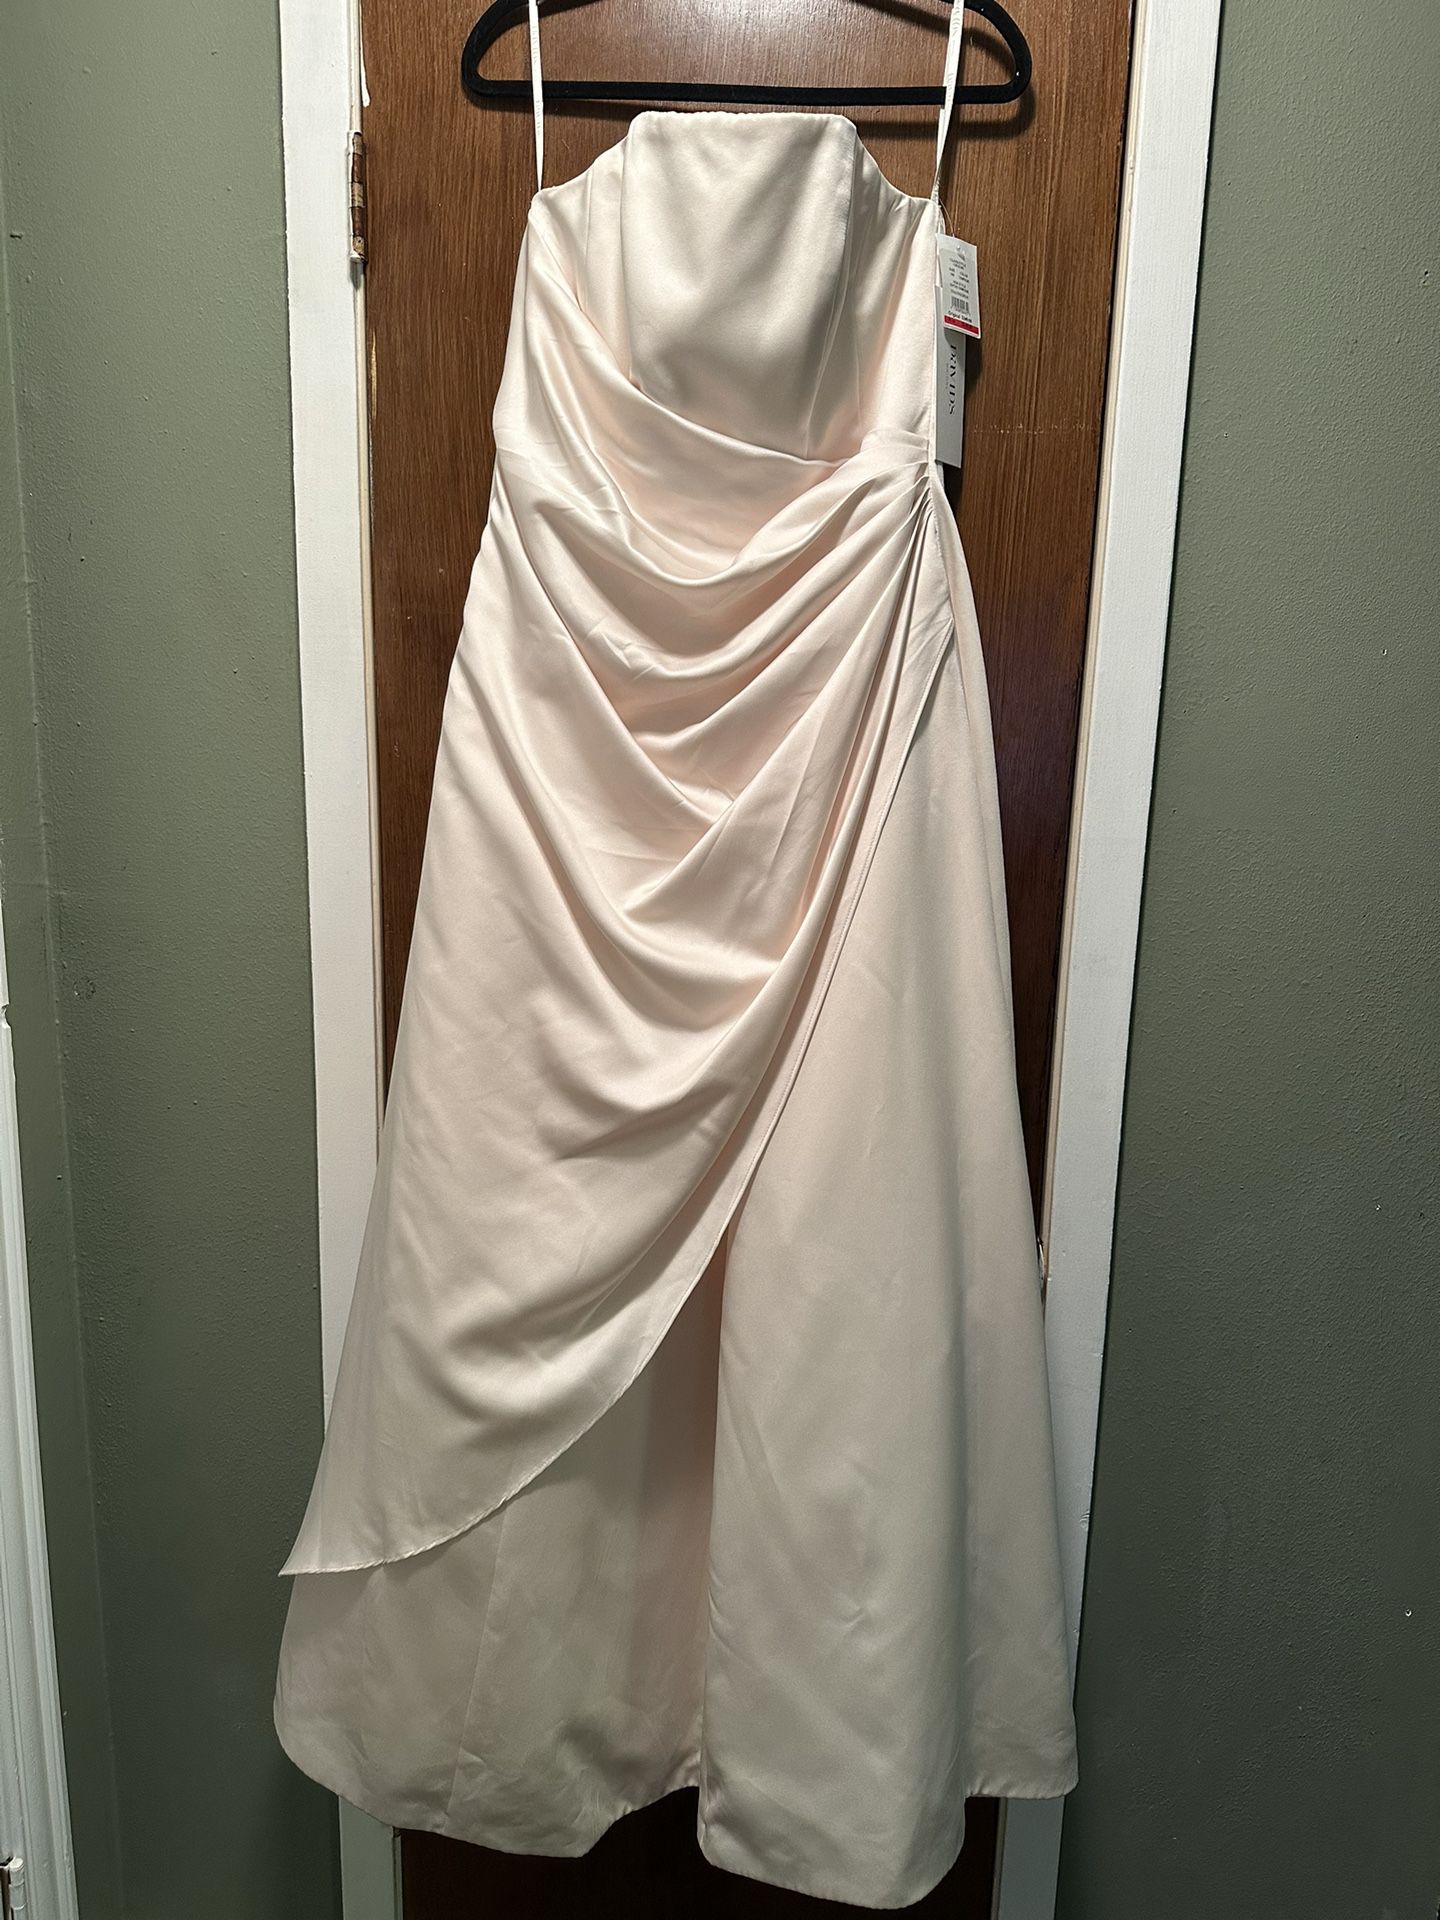 New Wedding Gown Or Prom Dress (Never Worn)